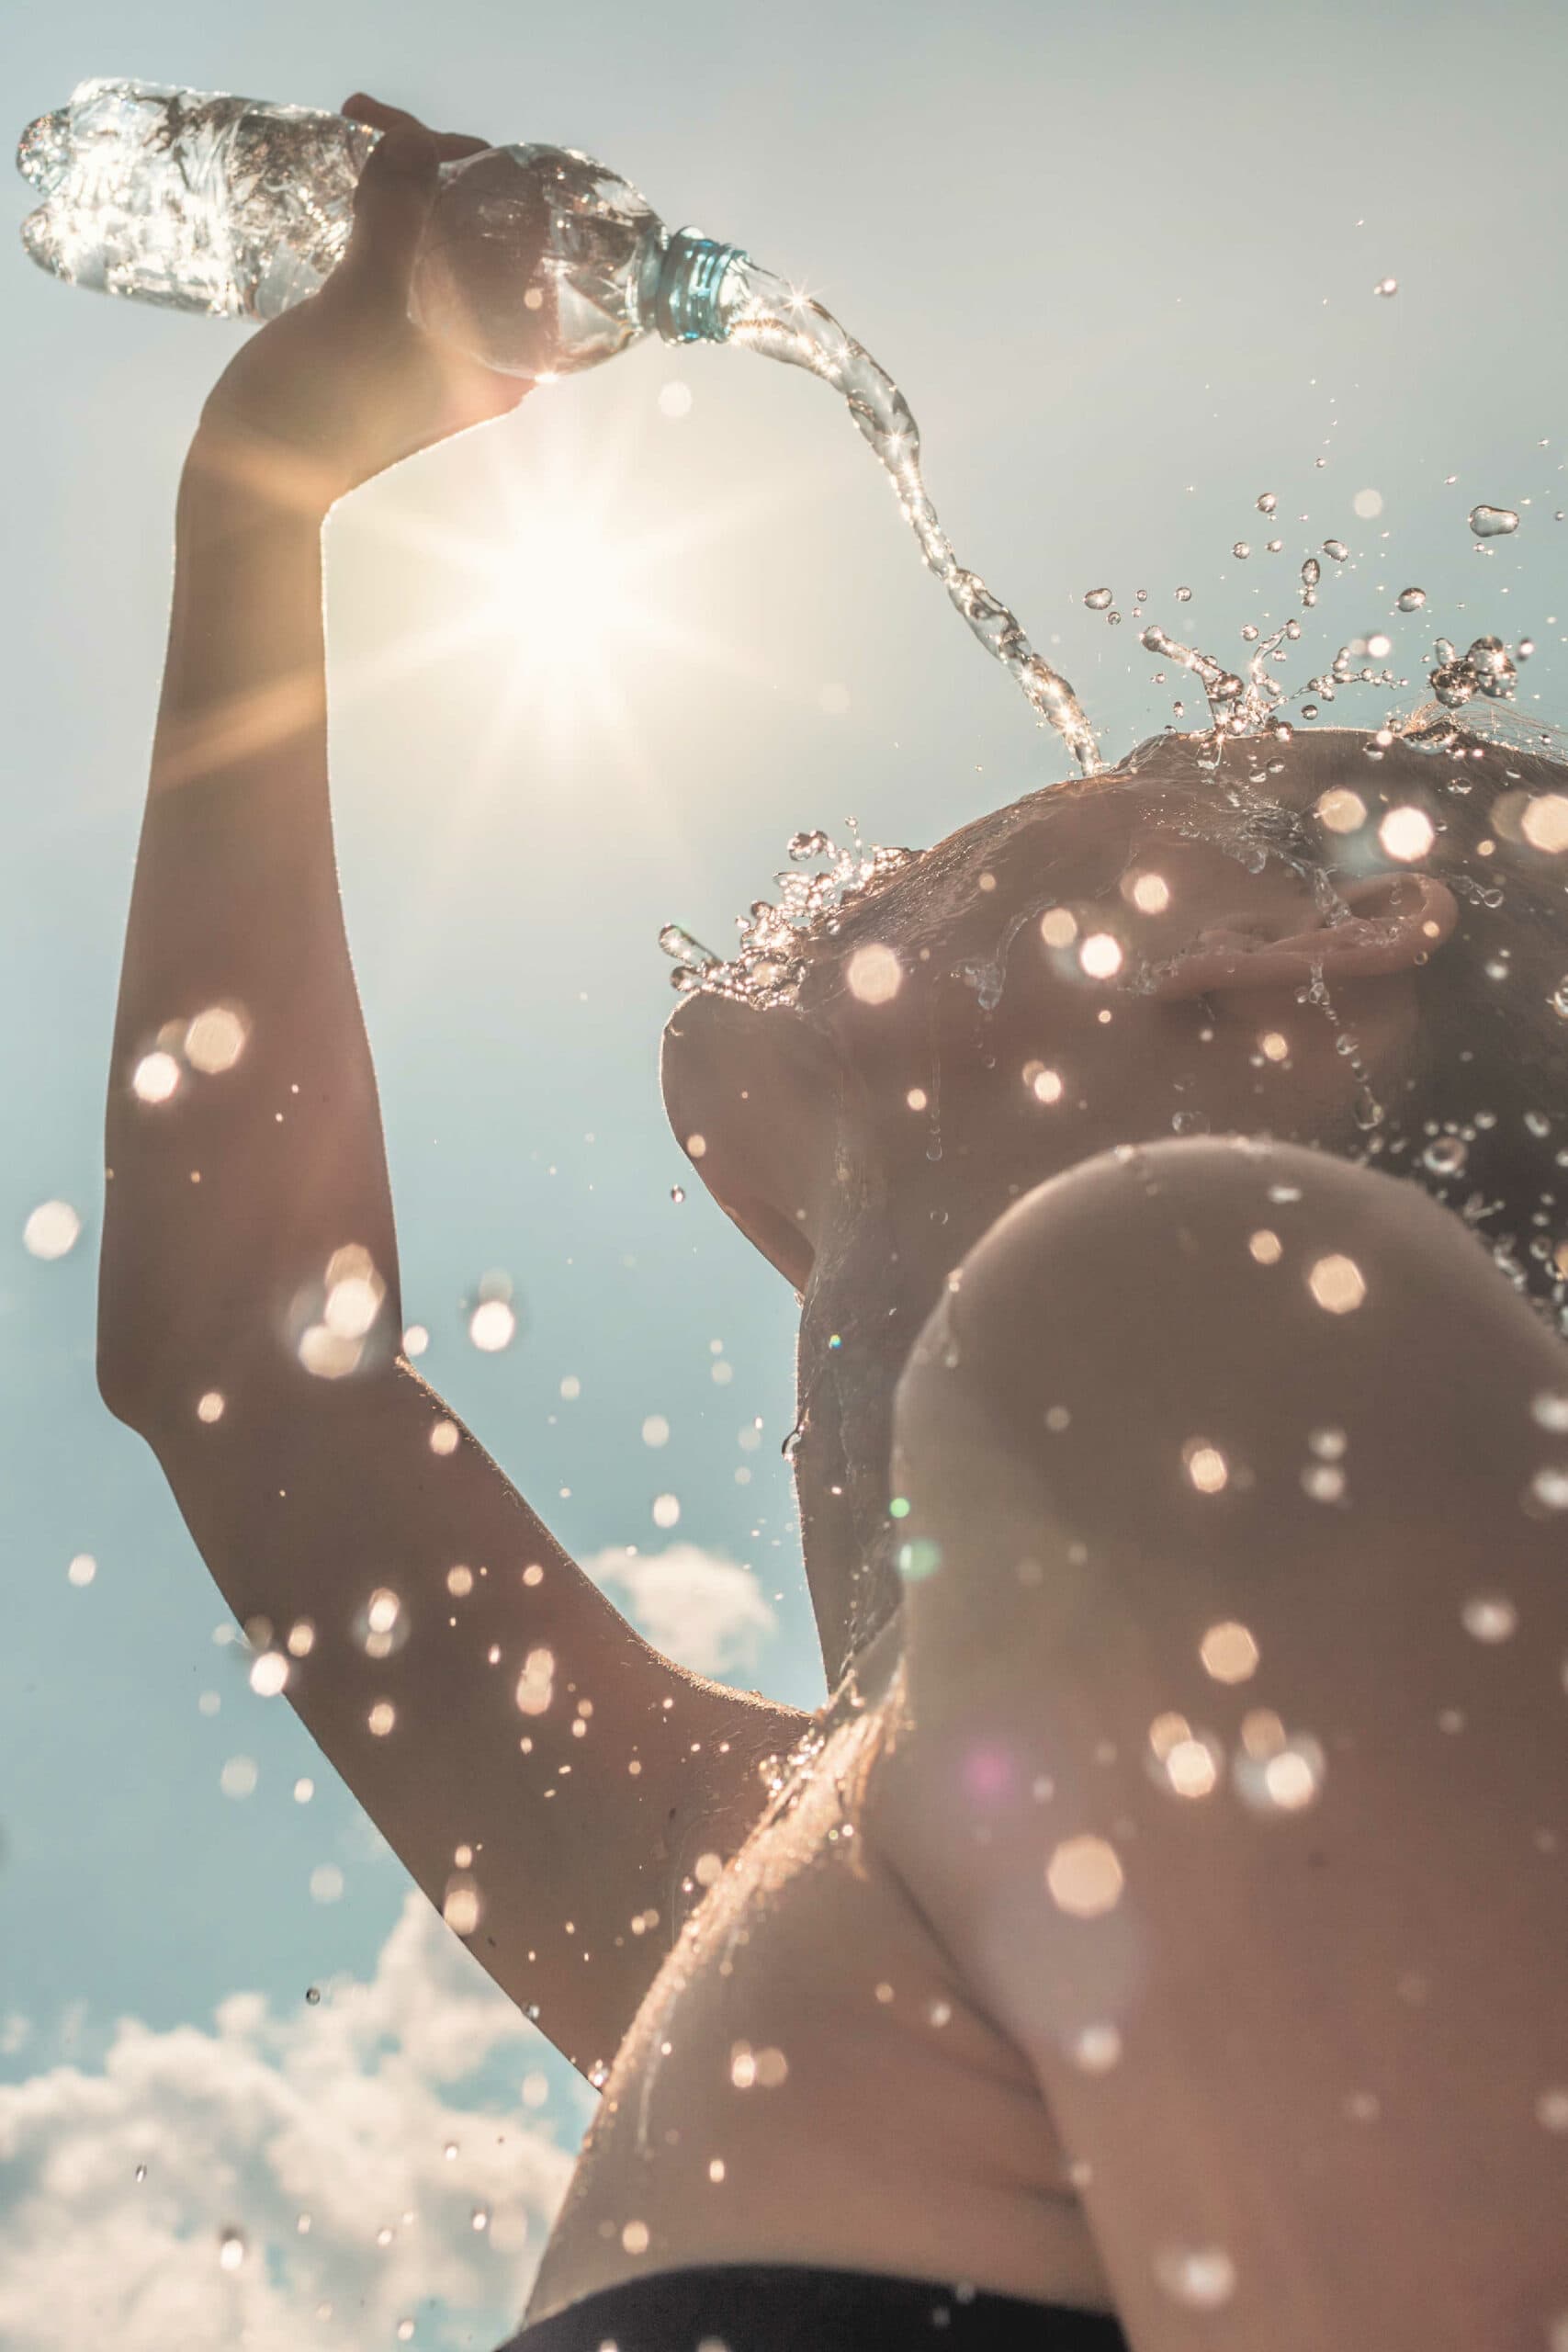 woman pouring water over face to cool off in the summer heat